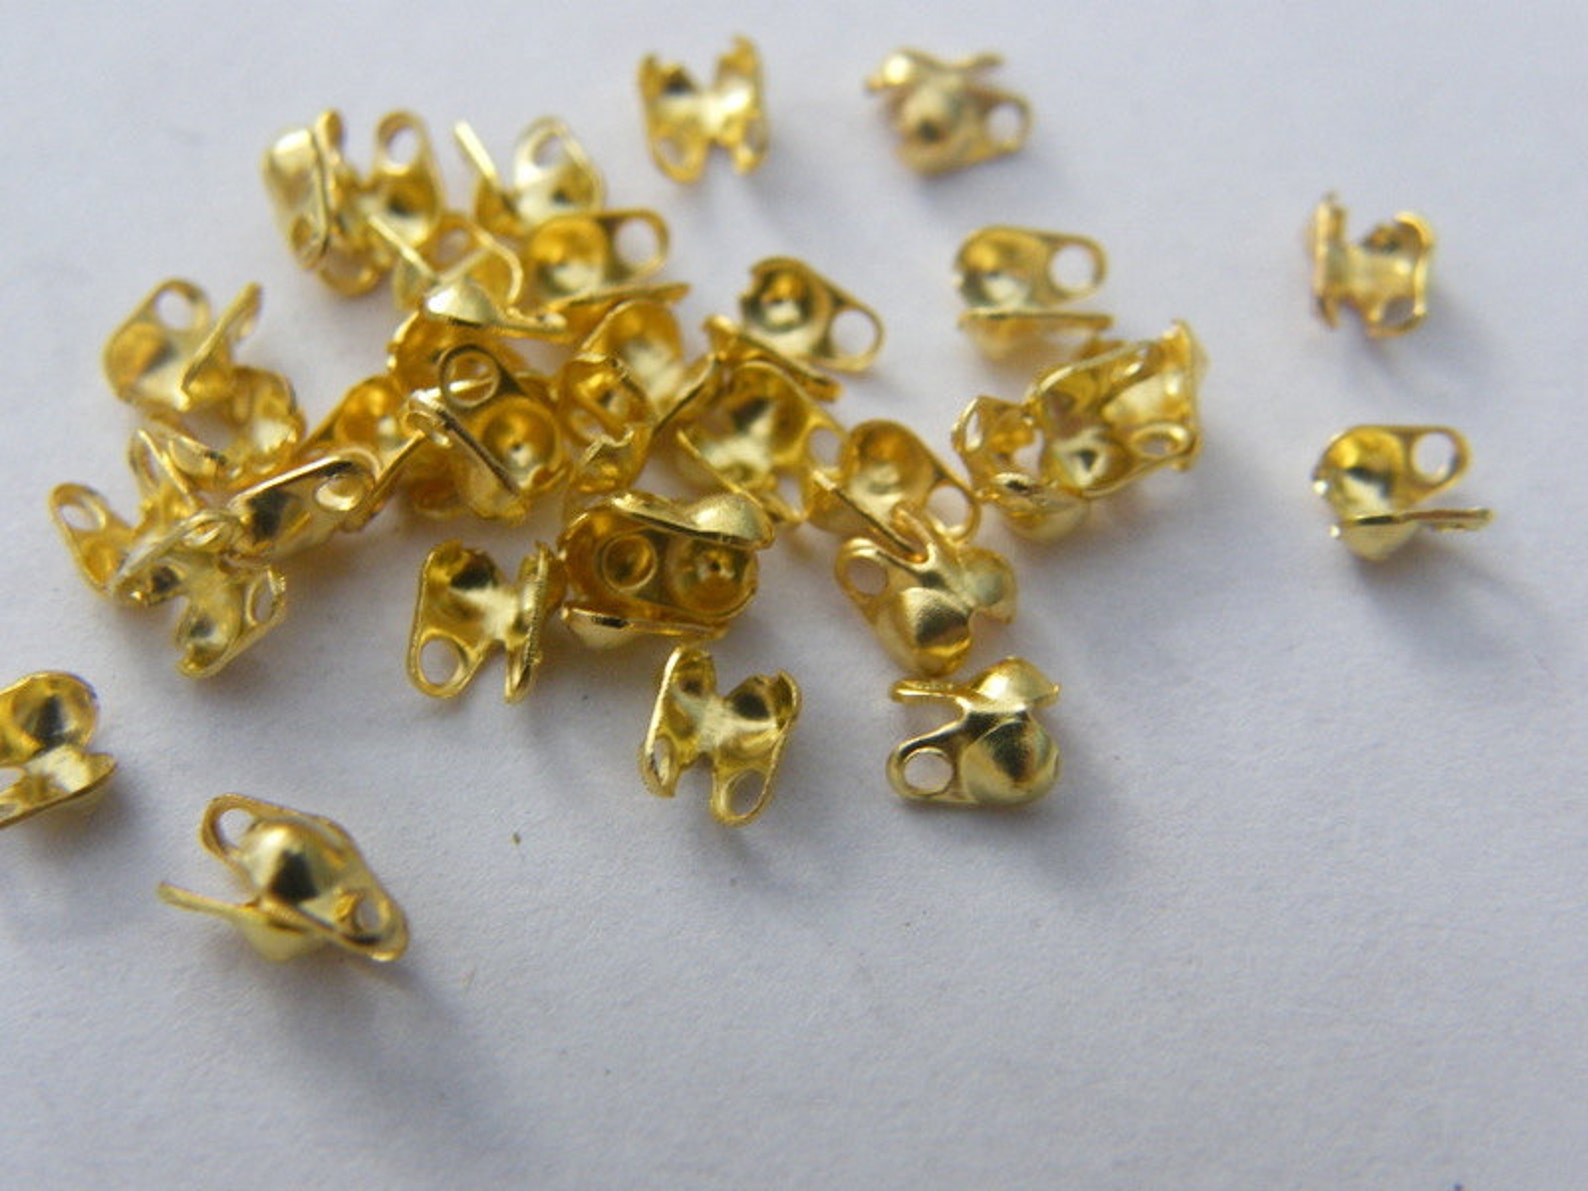 100 Calottes End Crimps for 1 to 1.5mm Ball Chain 4 X 3.5mm - Etsy